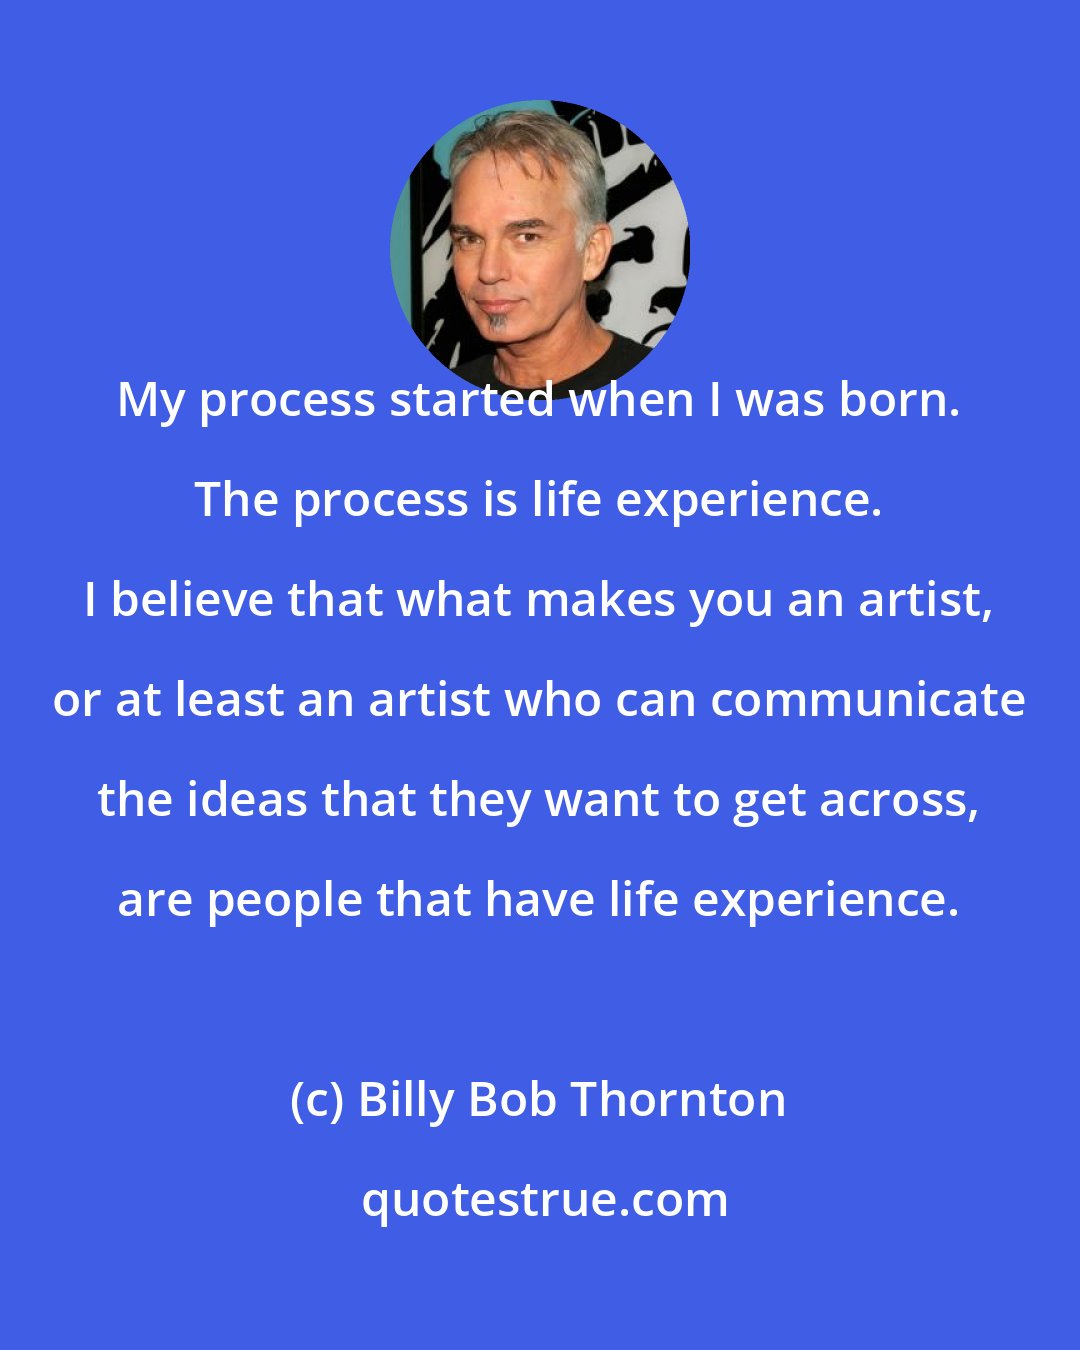 Billy Bob Thornton: My process started when I was born. The process is life experience. I believe that what makes you an artist, or at least an artist who can communicate the ideas that they want to get across, are people that have life experience.